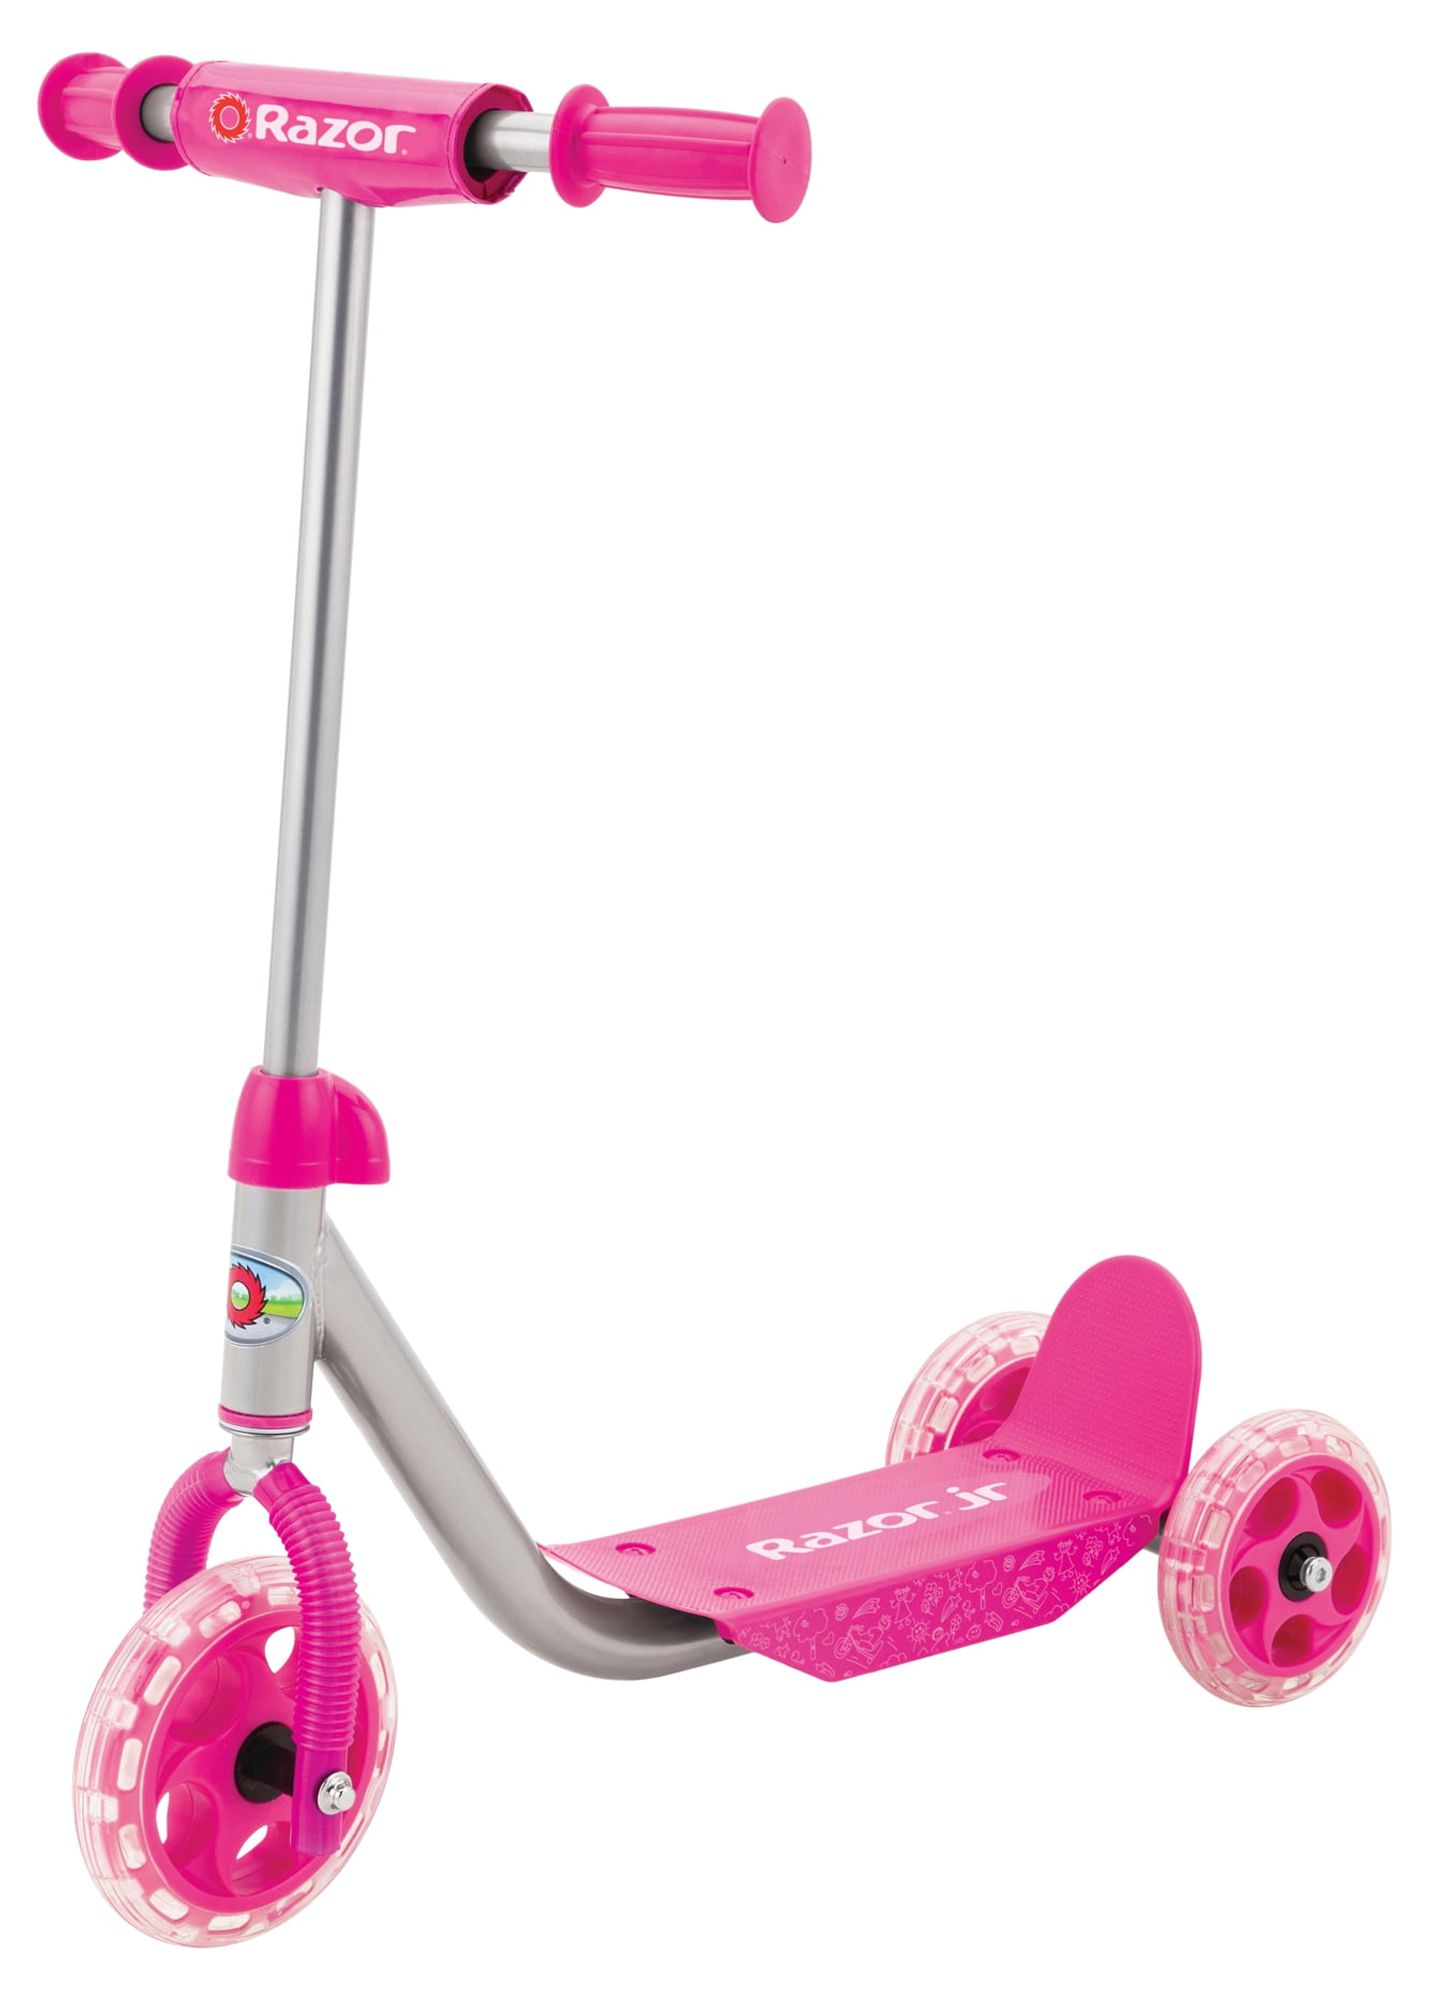 Razor Jr. Lil' Kick - 3-wheel Kick Scooter for Younger Children (Ages 3+), Max Rider Weight 44 lb (20 kg) - image 1 of 3